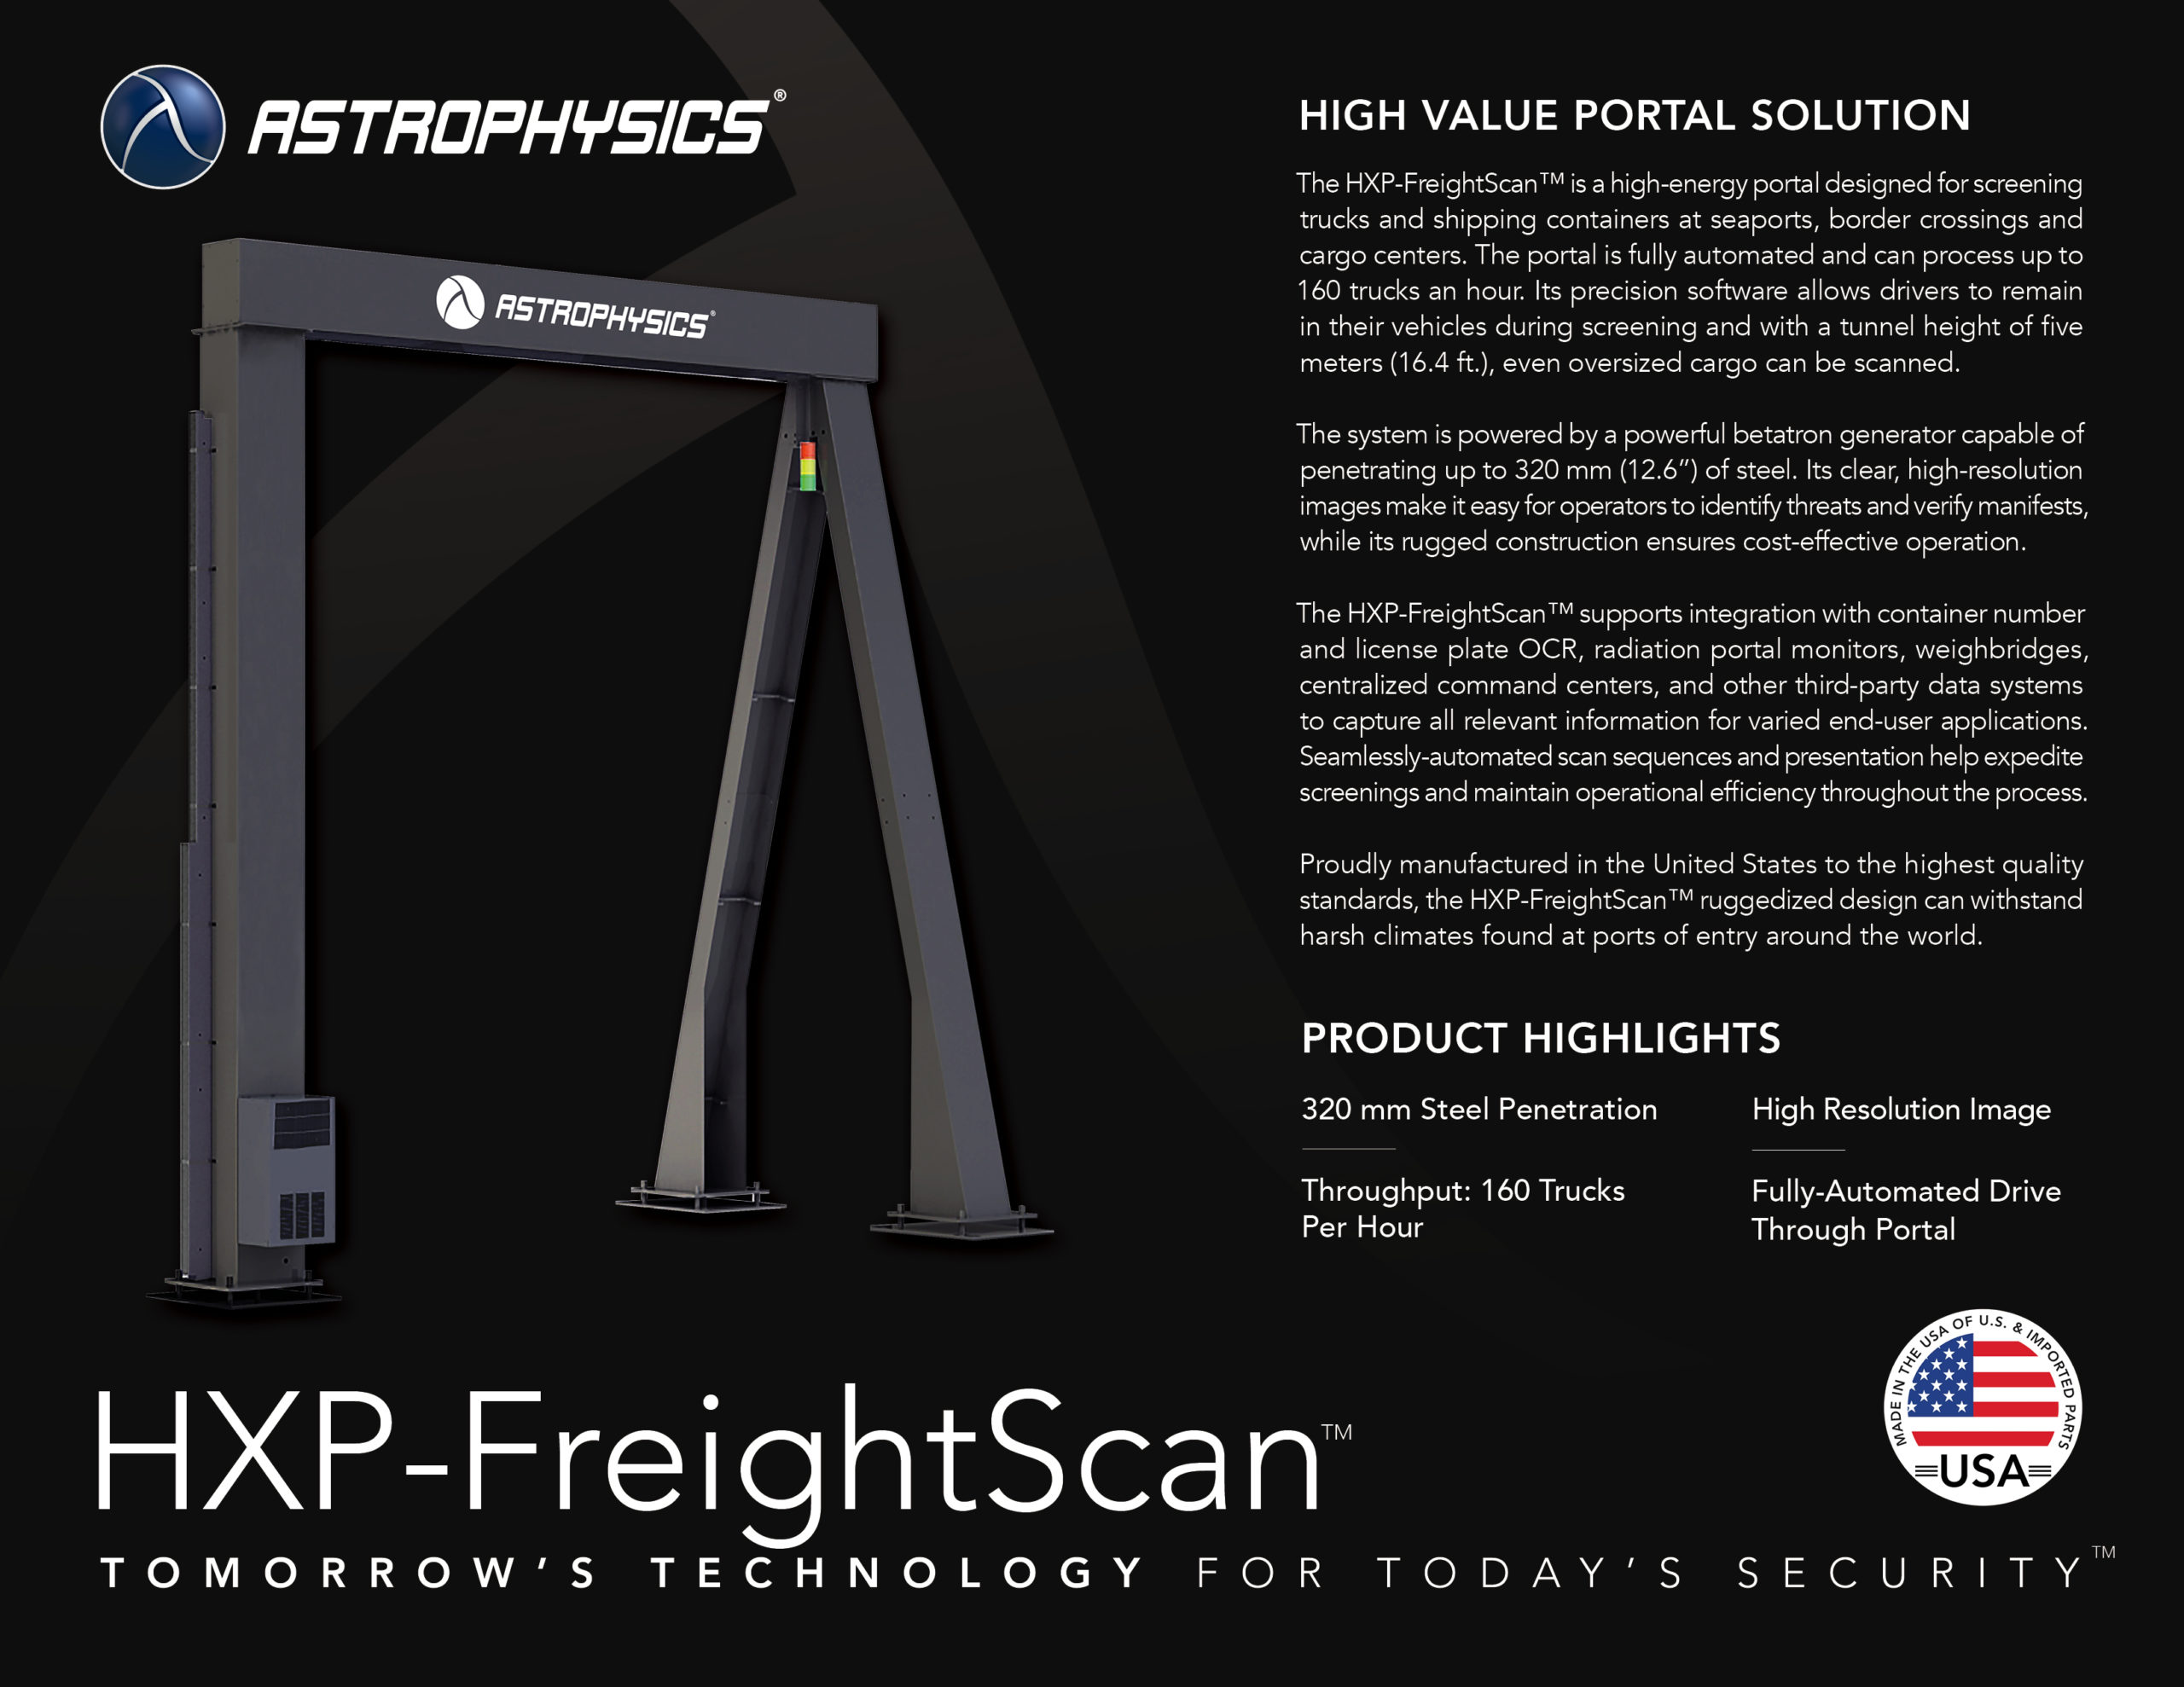 HXP-FreightScan™ product brochure